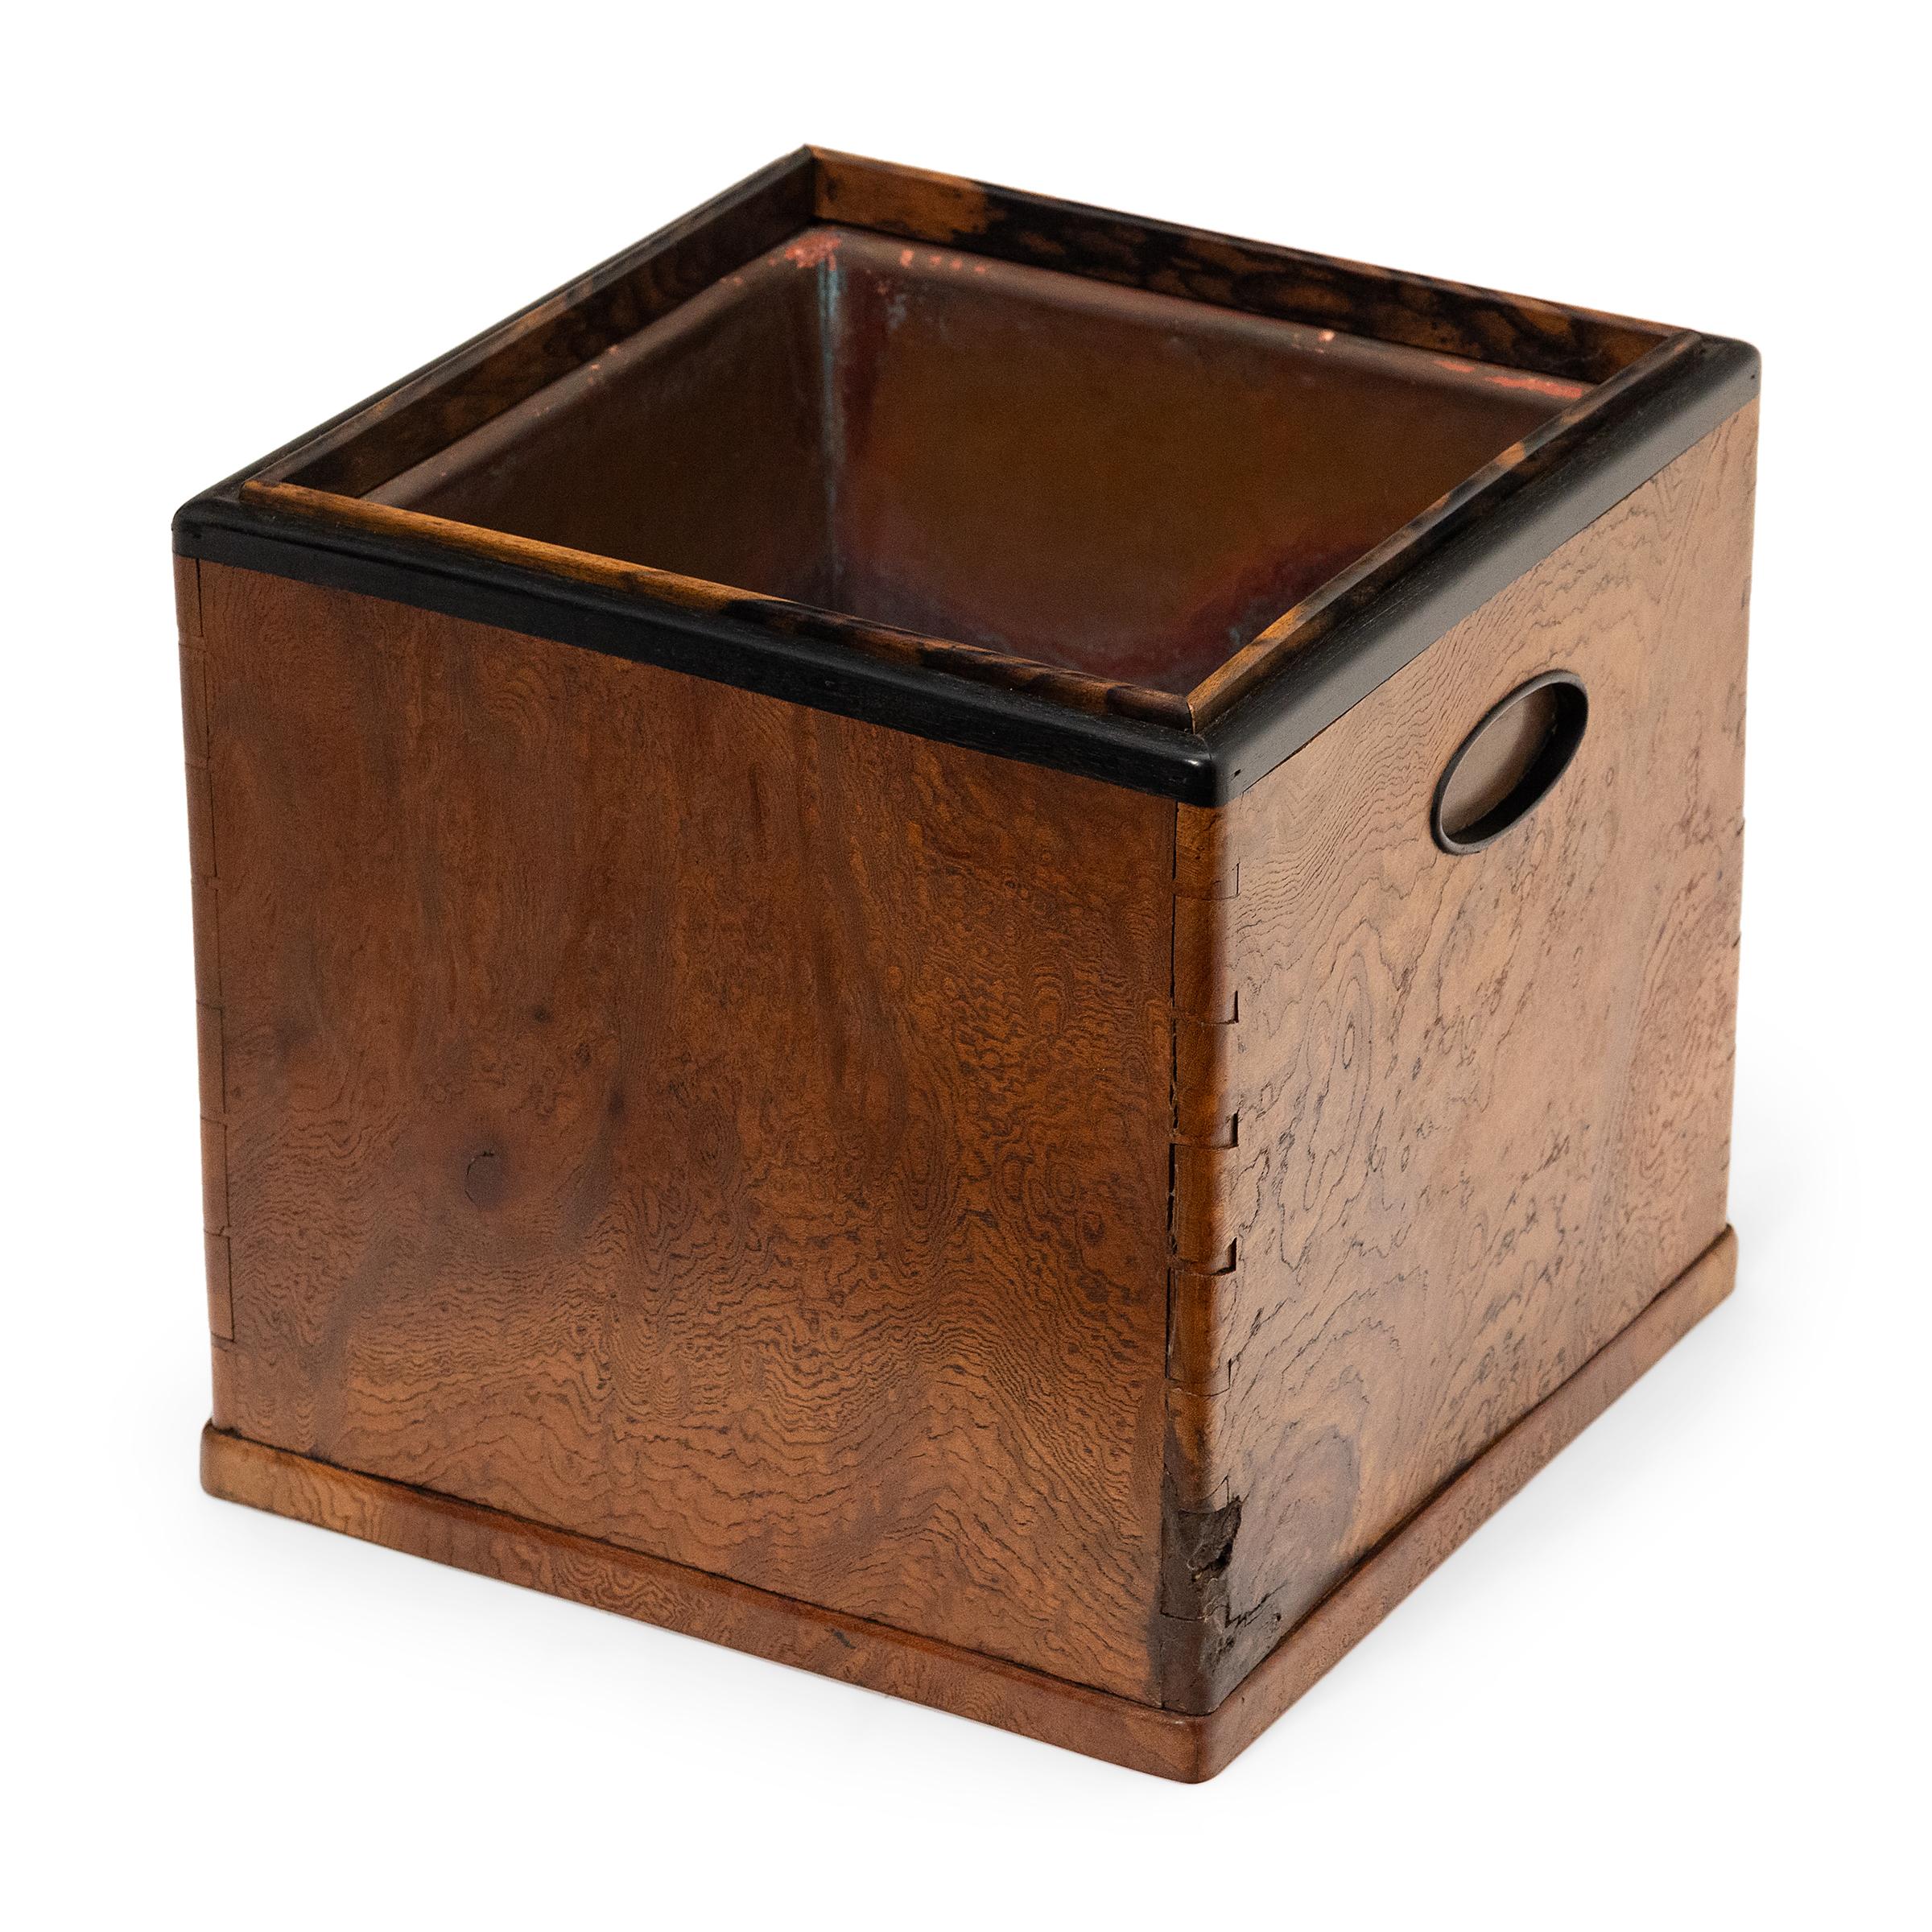 Known as a kaku-hibachi, this container was the center of social life in a Meiji era home. Used to brew tea or heat sake, the kaku-hibachi is a portable form of the traditional hearth. Carefully crafted, the square box is topped with a copper well